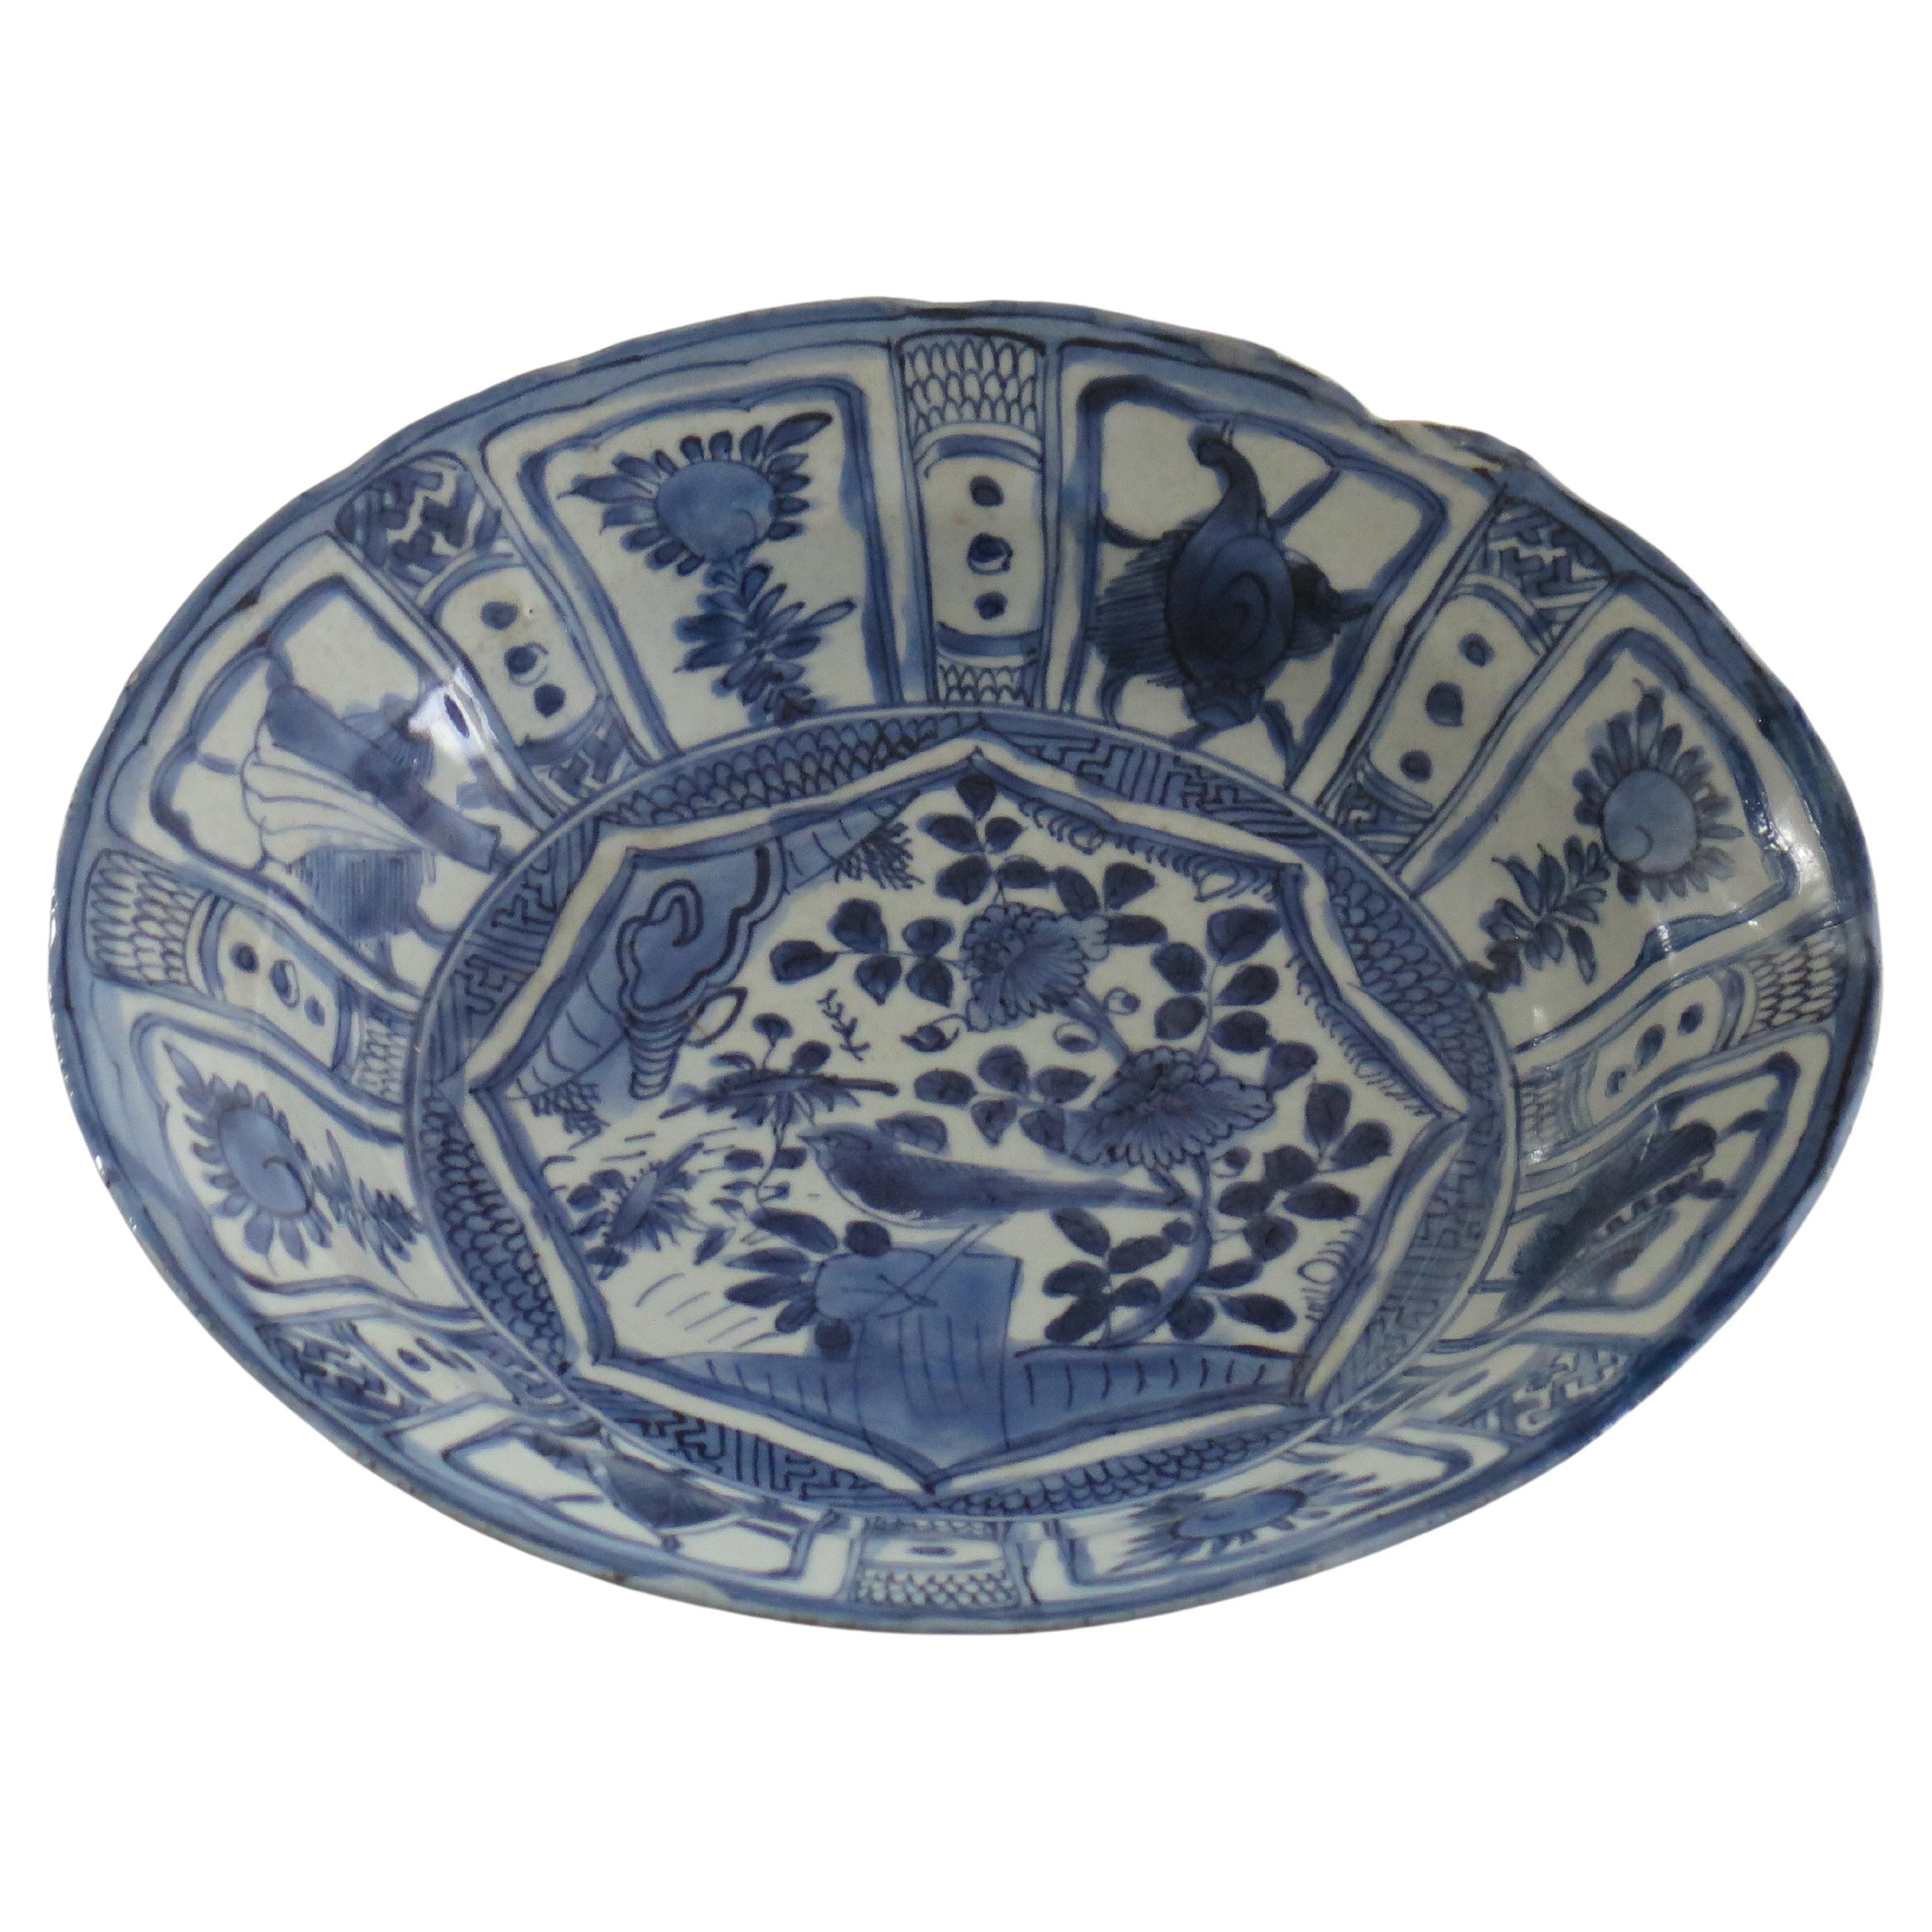 This is a Kraak or Kraak-ware Chinese Export porcelain dish or deep plate hand painted in a typical Blue and white pattern, made during the reign of Wanli (1573 to 1620).

The dish is potted with a slightly everted rim with a well cut foot rim.